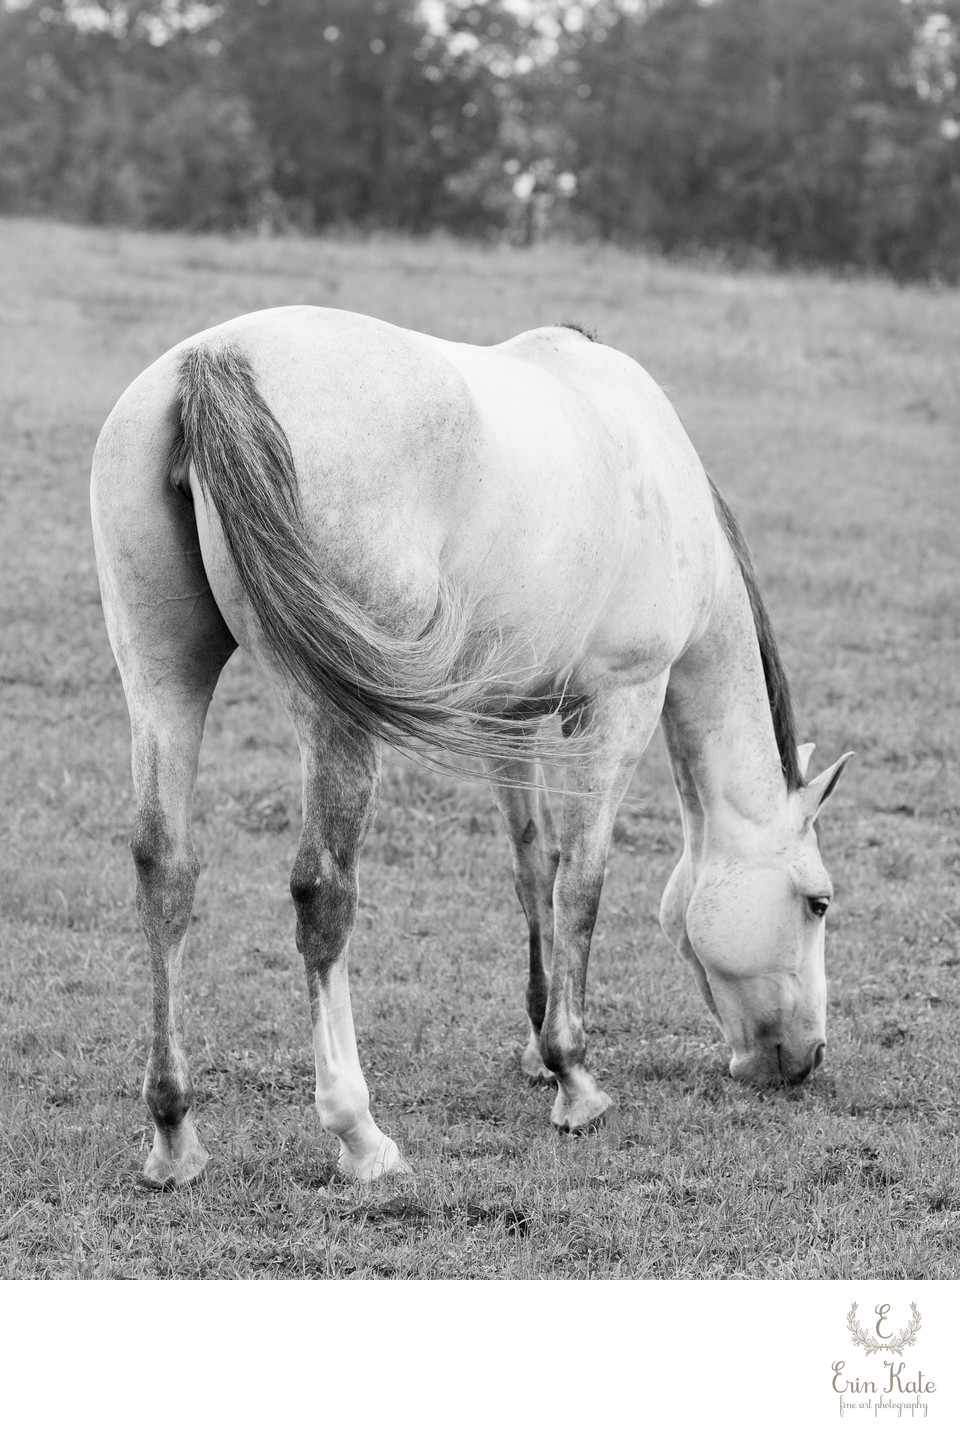 Gray Horse Grazing in Black and White